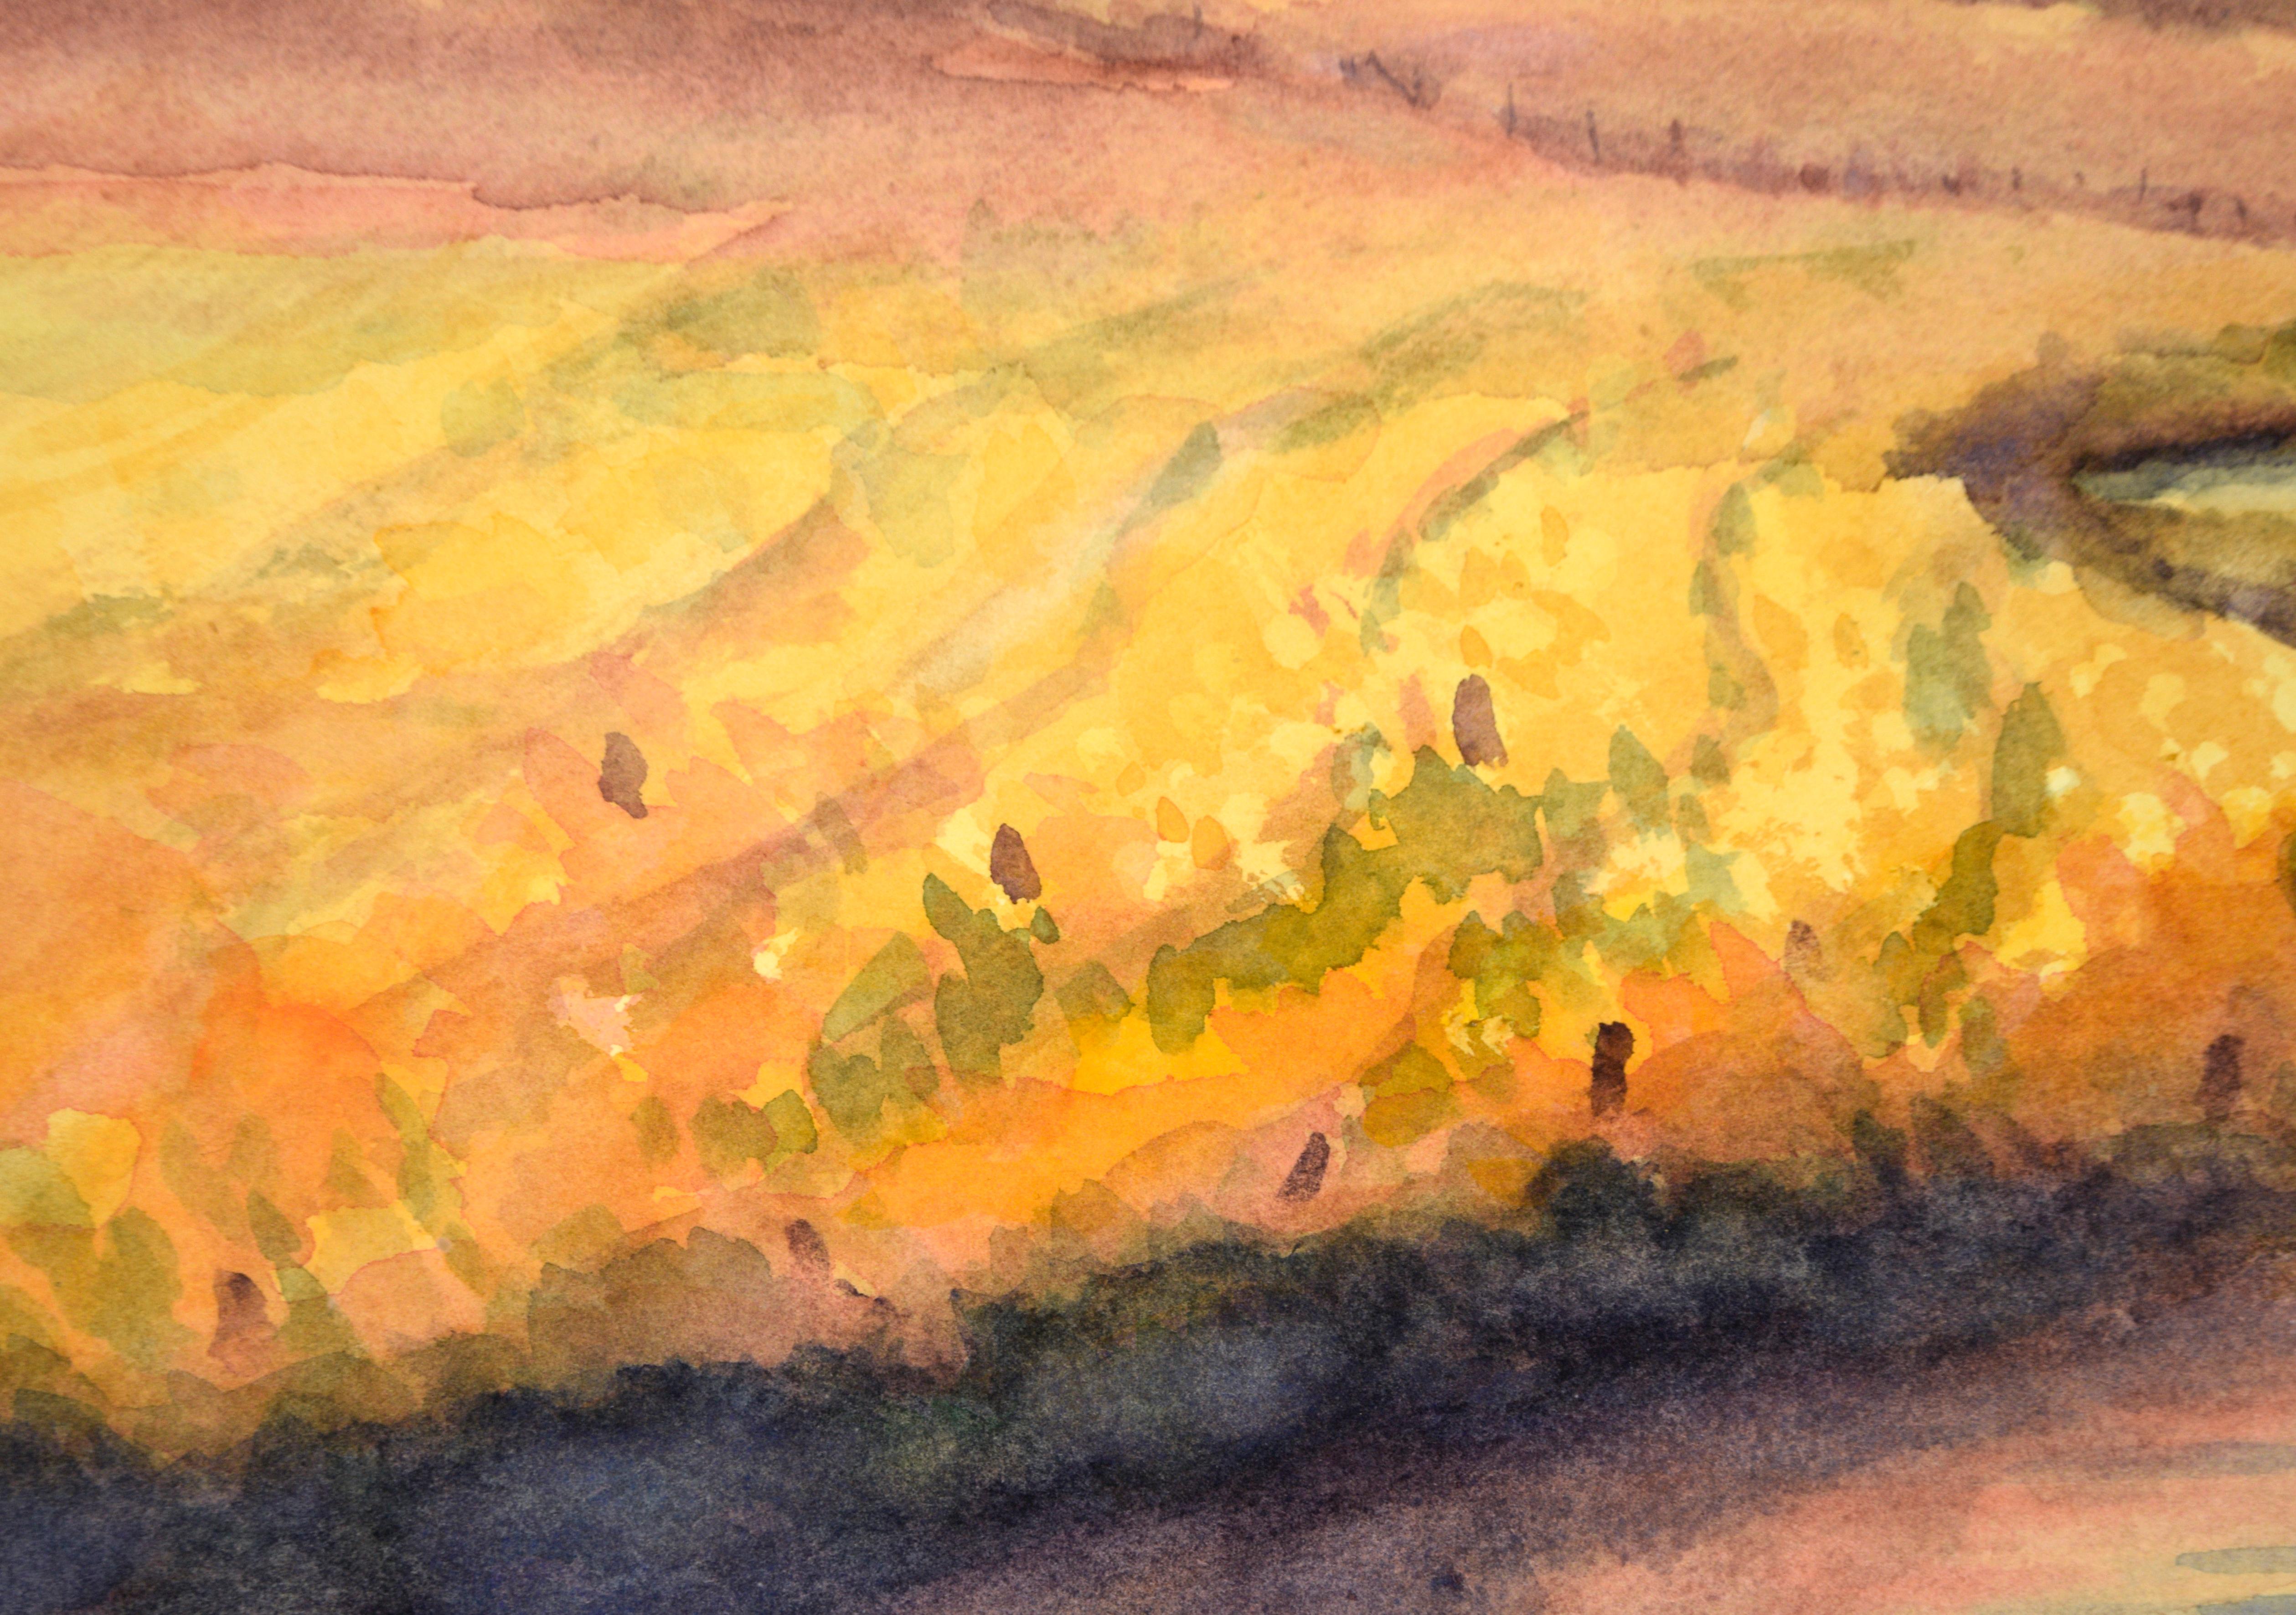 Golden Hour at the River - Watercolor Landscape on Paper

Glowing sunset landscape by Rosalind O'Neal (American, b. 1927). A river winds winds towards the viewer, reflecting the glowing sunset. On the left bank, there are rows of crops in yellow and